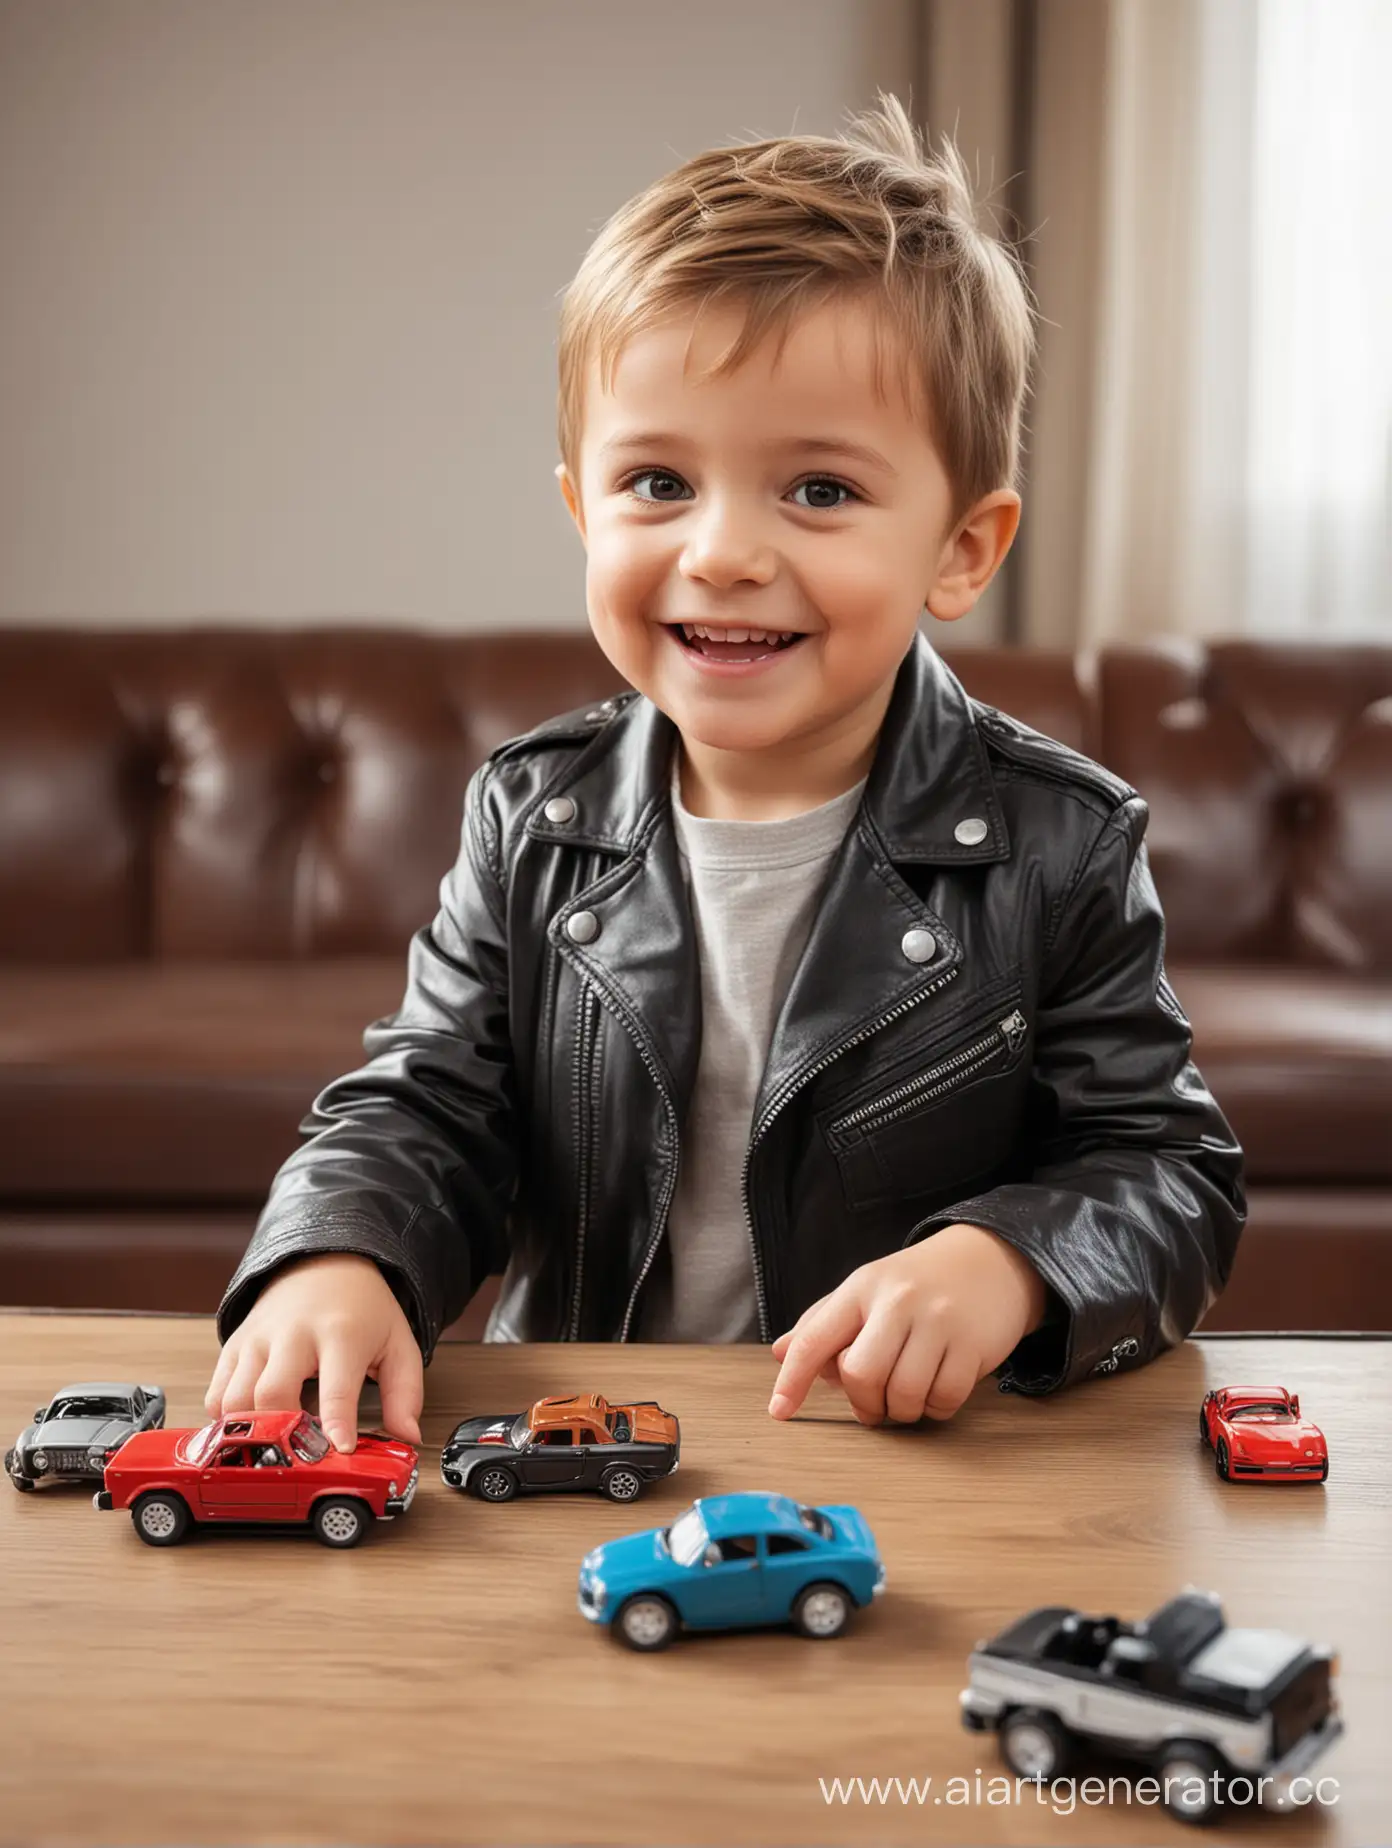 Cheerful-Boy-Playing-with-Toy-Cars-on-Table